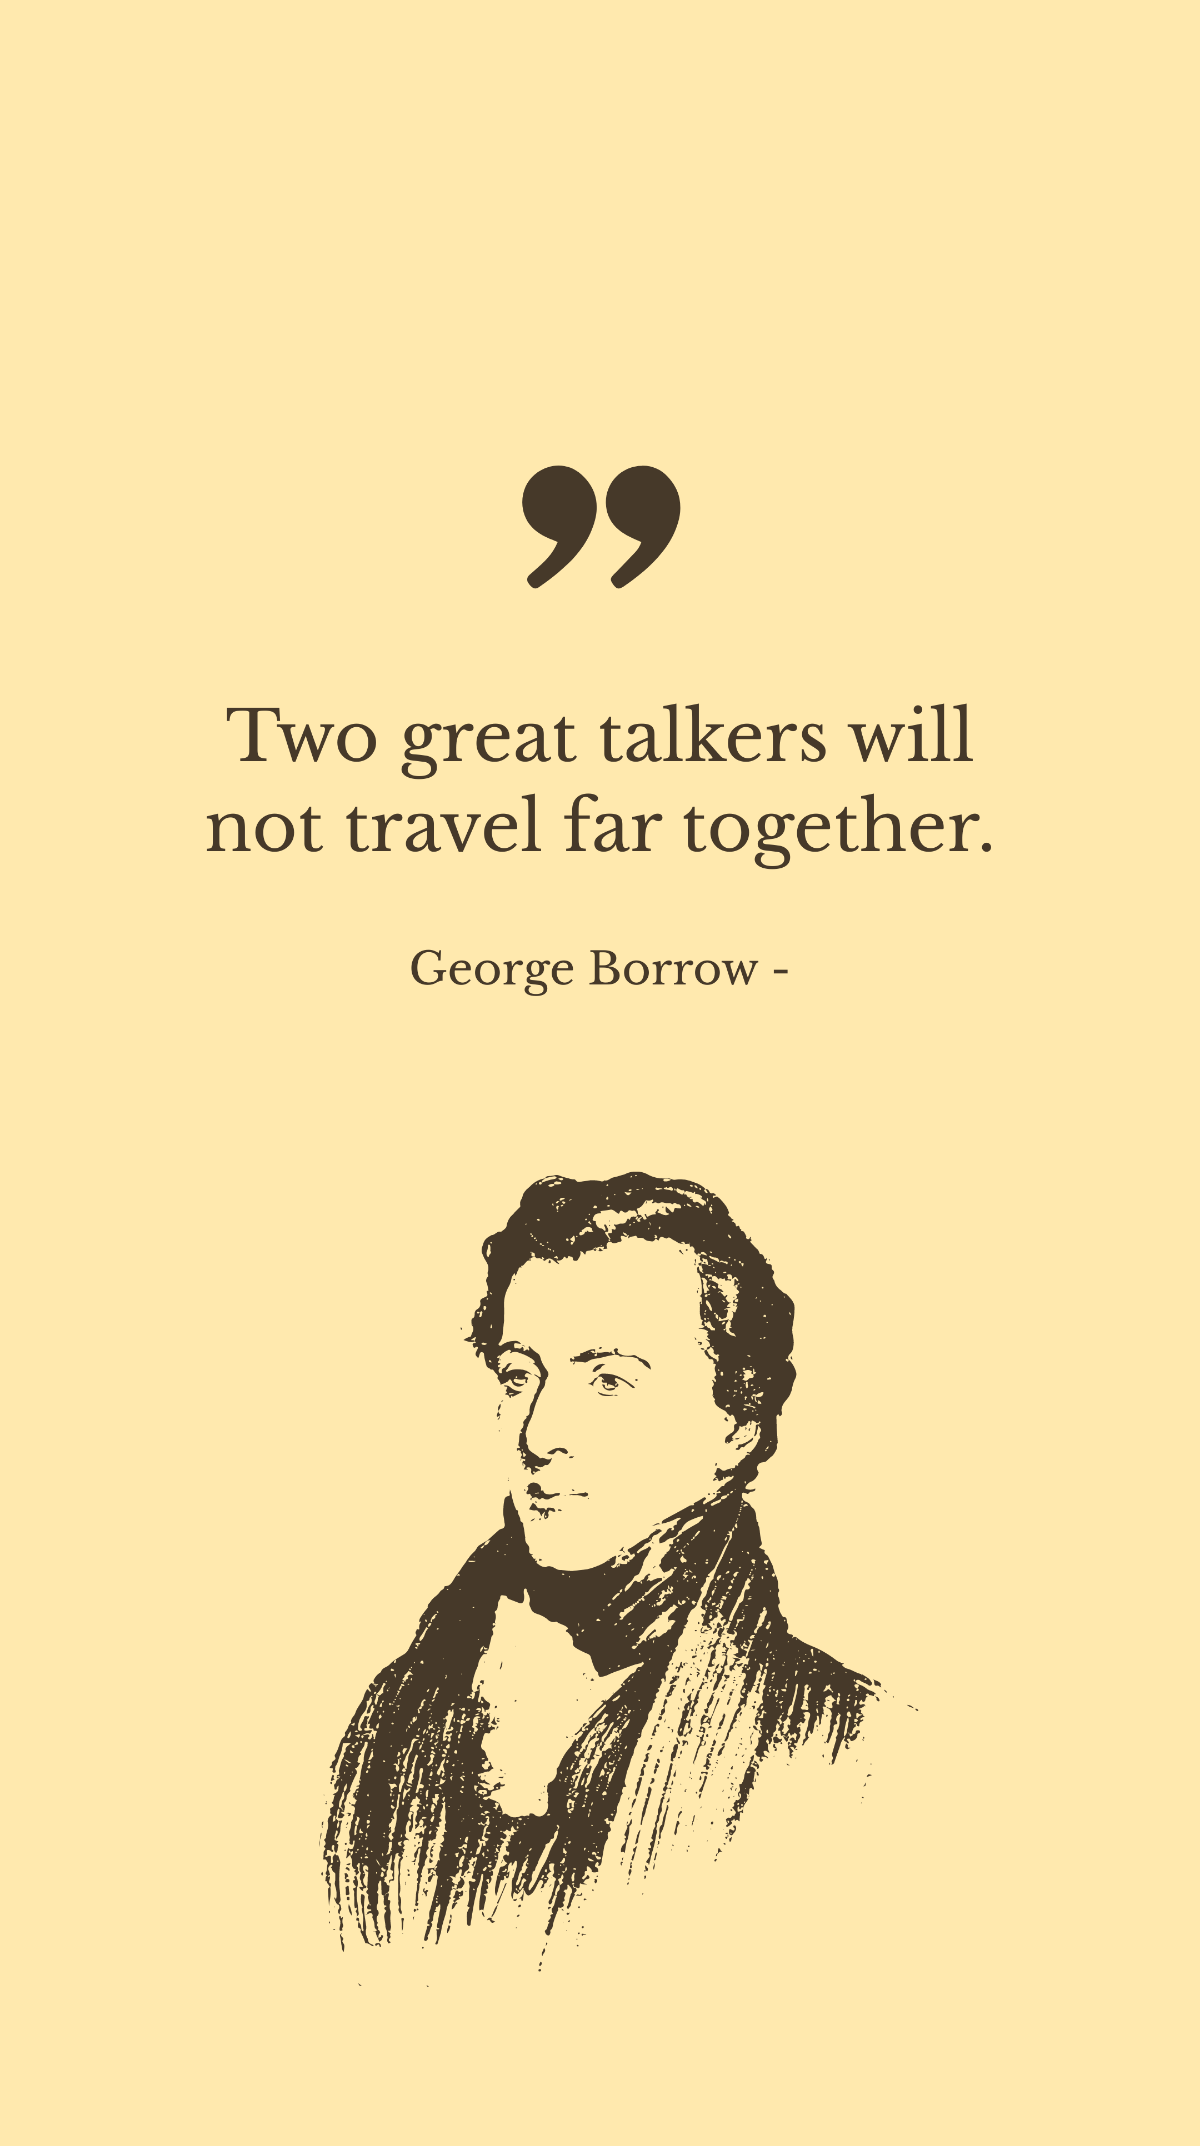 George Borrow - Two great talkers will not travel far together. Template